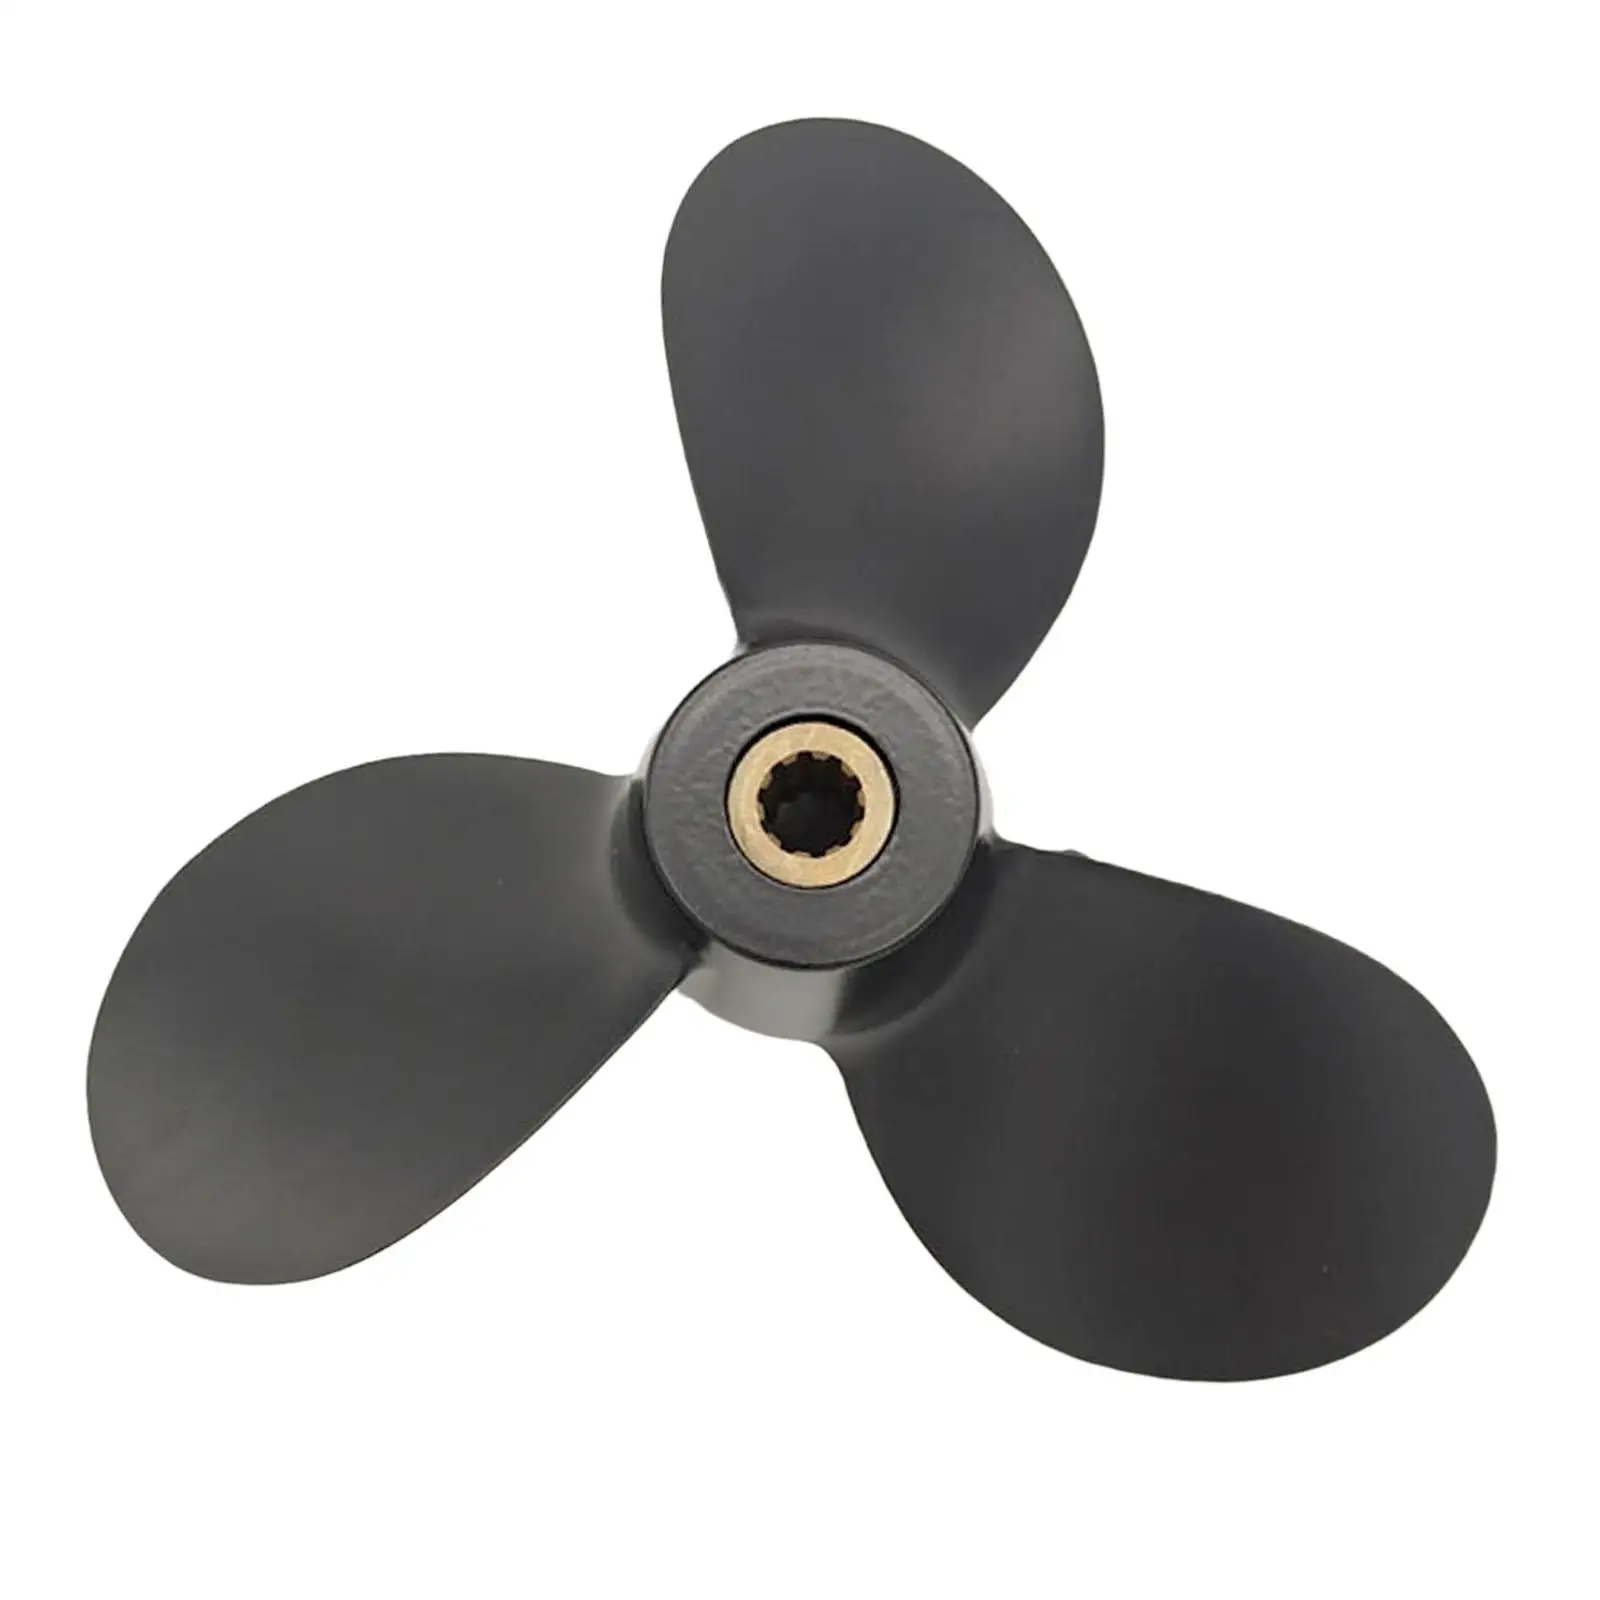 Boat Propeller 7 1/2x7 58111-98651-019 Durable Easily Install for Suzuki 4-6HP